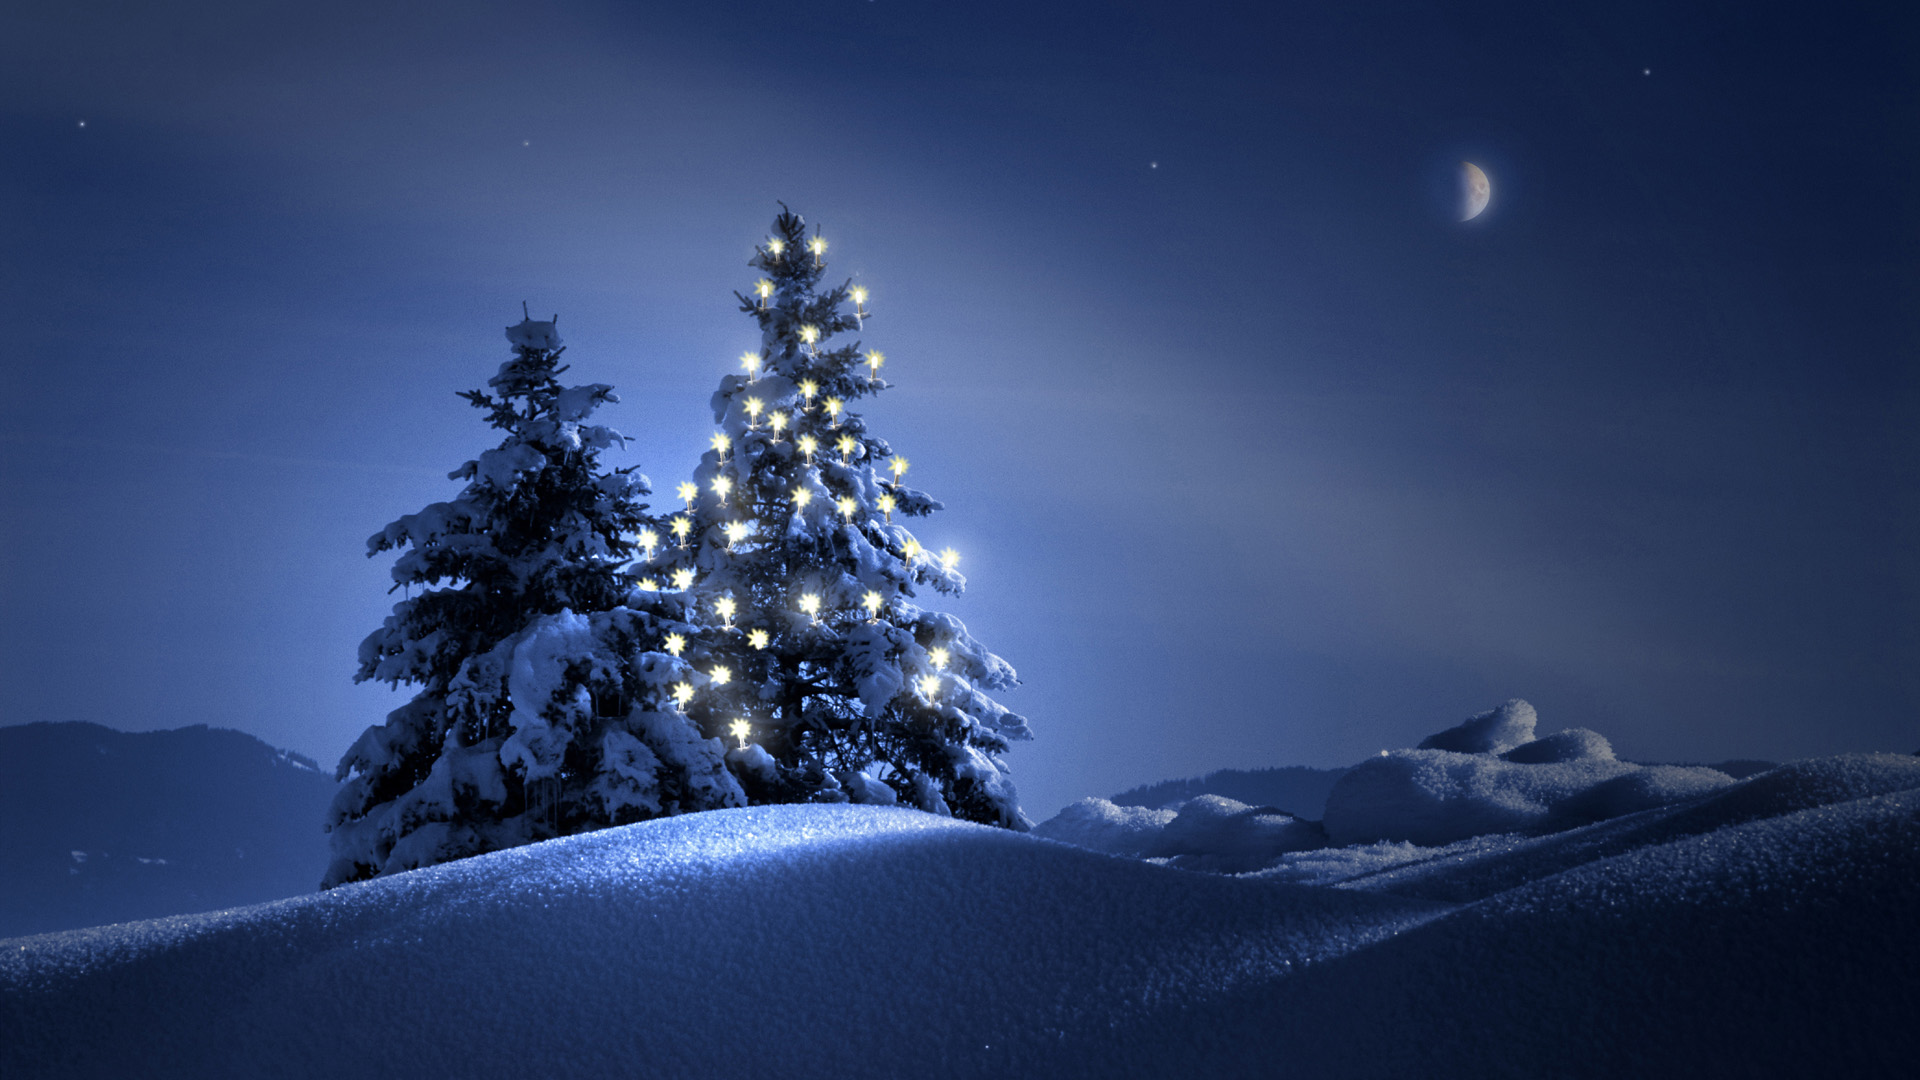 winter scenes wallpaper free which is under the winter wallpapers